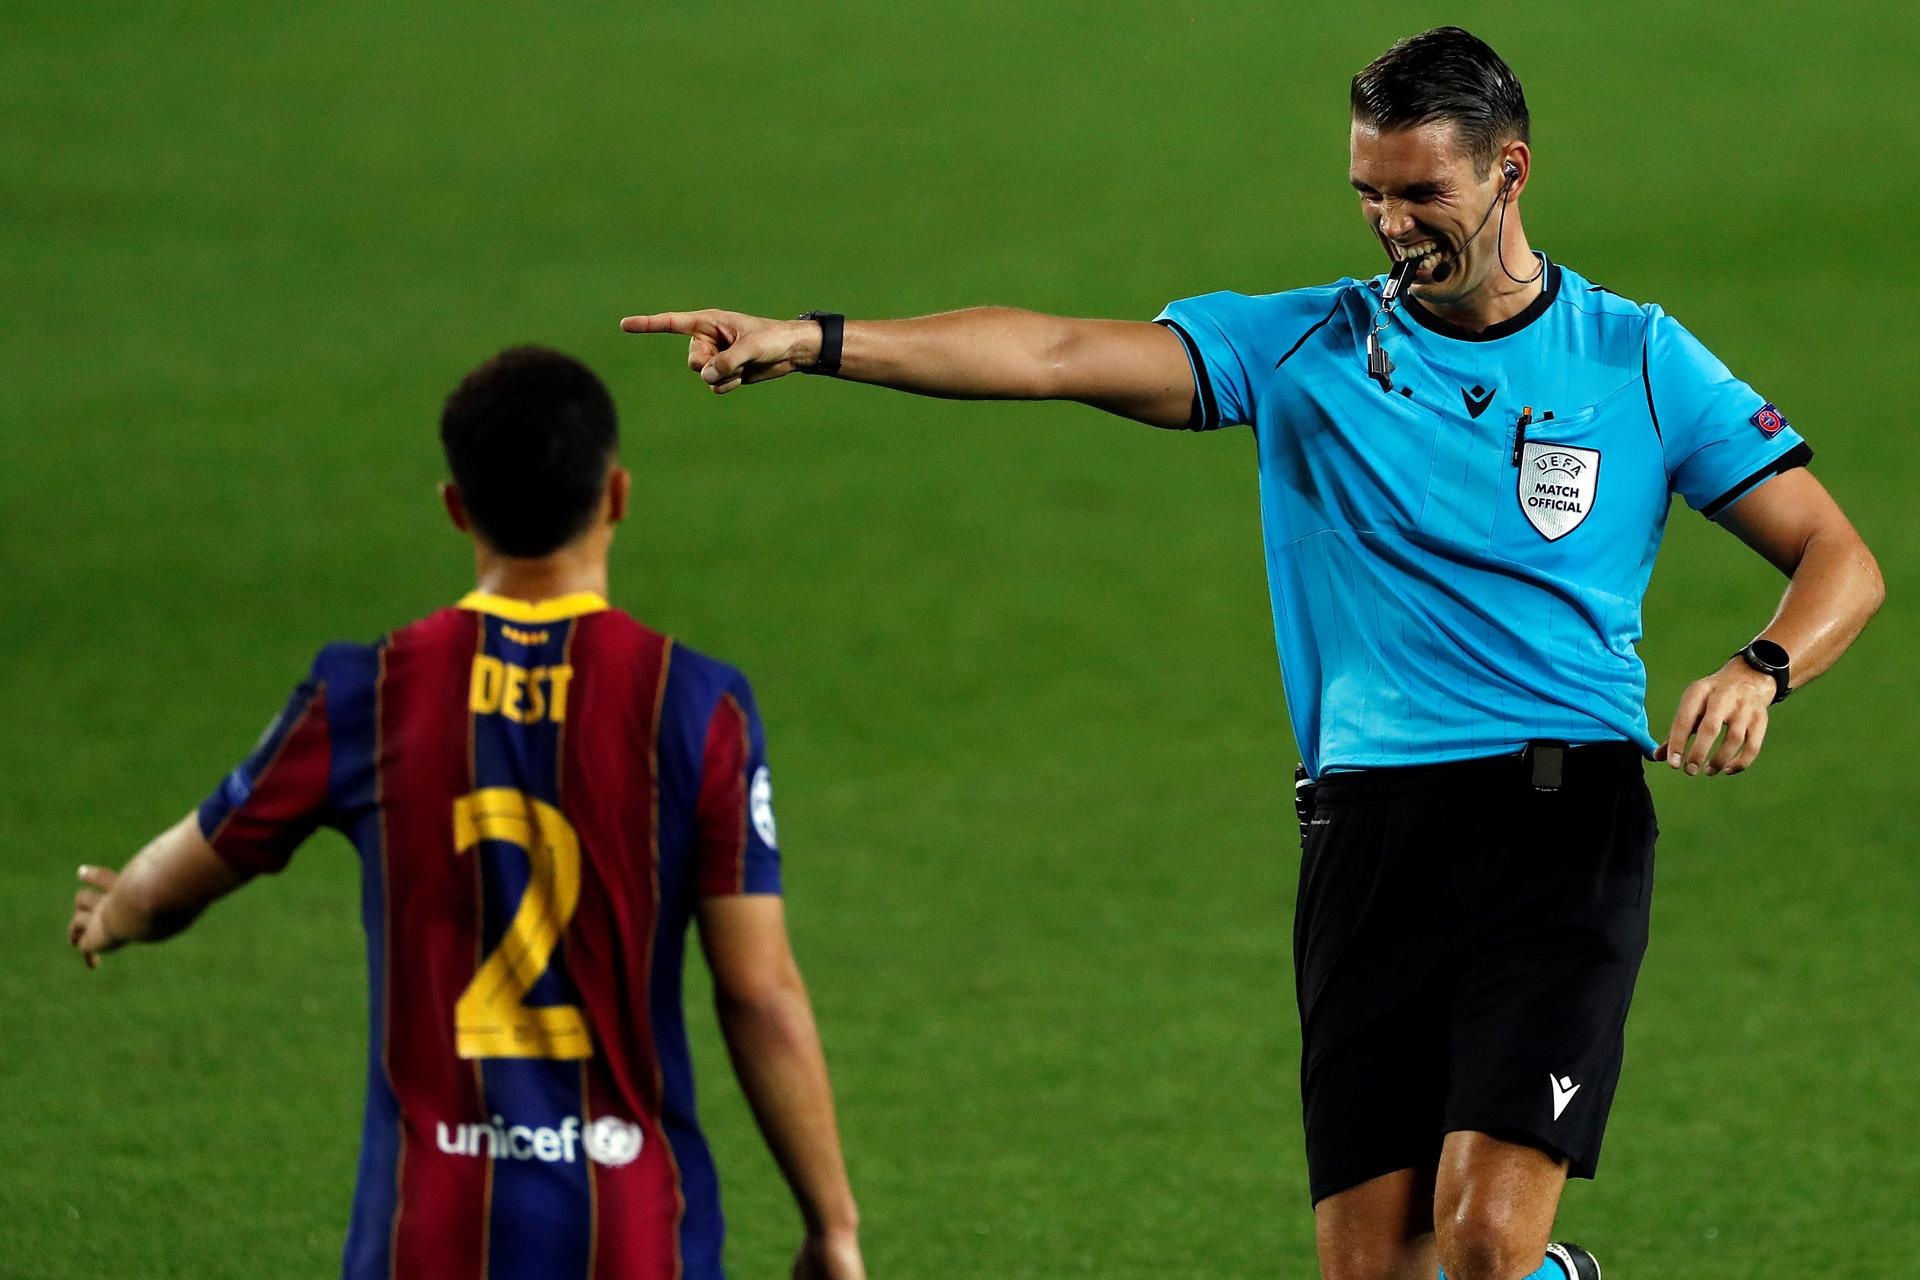 UEFA has announced the referees for the European Super Cup final between Real Madrid and Atalanta, which will be played on 14 August in Warsaw. The match will be refereed by Sandro Scharer, who has only refereed the Spanish giants once before.